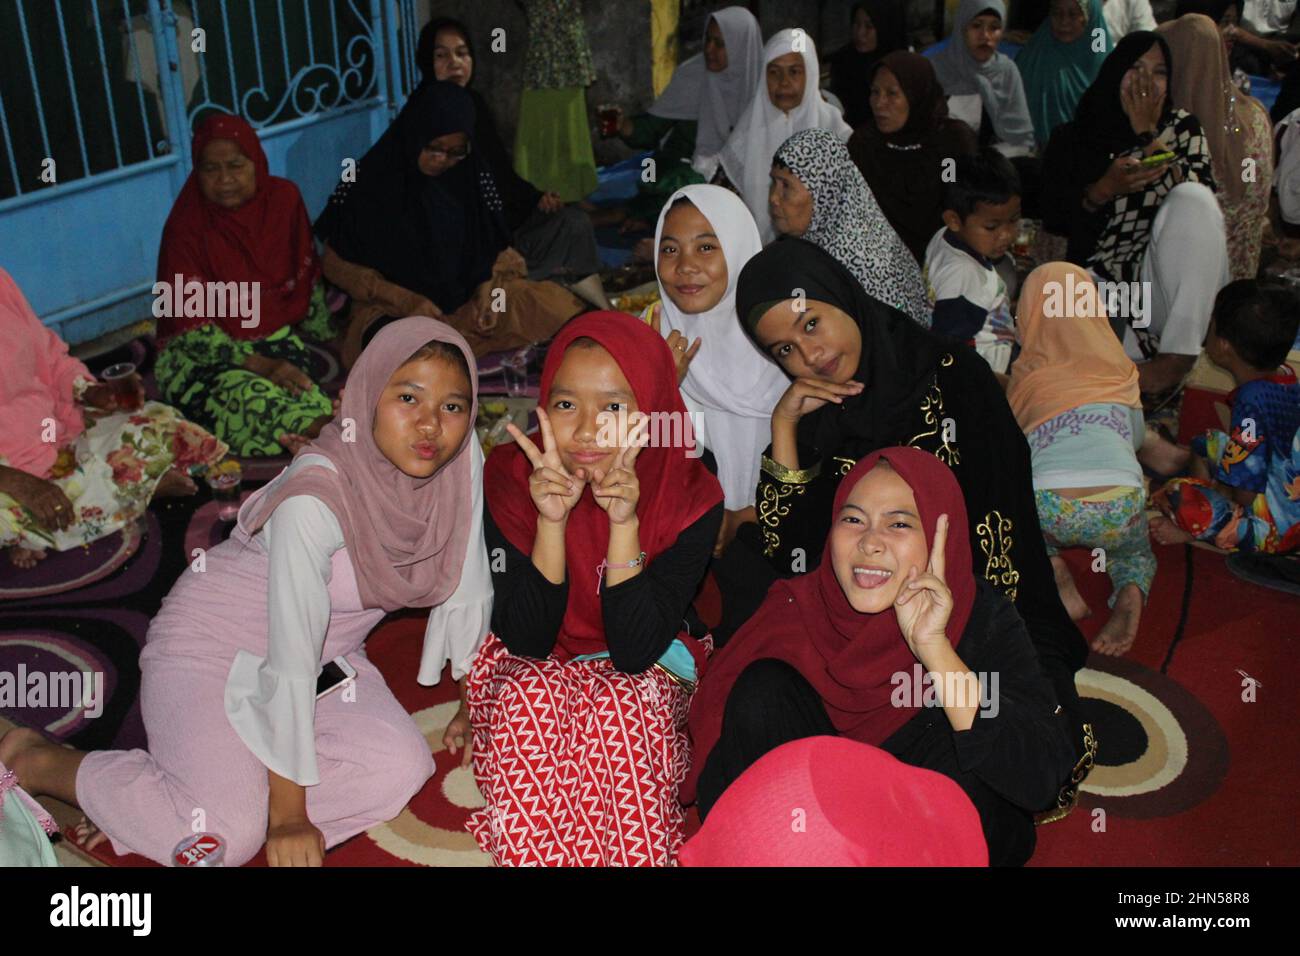 Jakarta, Indonesia - 11 19 2020: A group of veiled women pose together during the Isra Miraj of Prophet Muhammad SAW Stock Photo